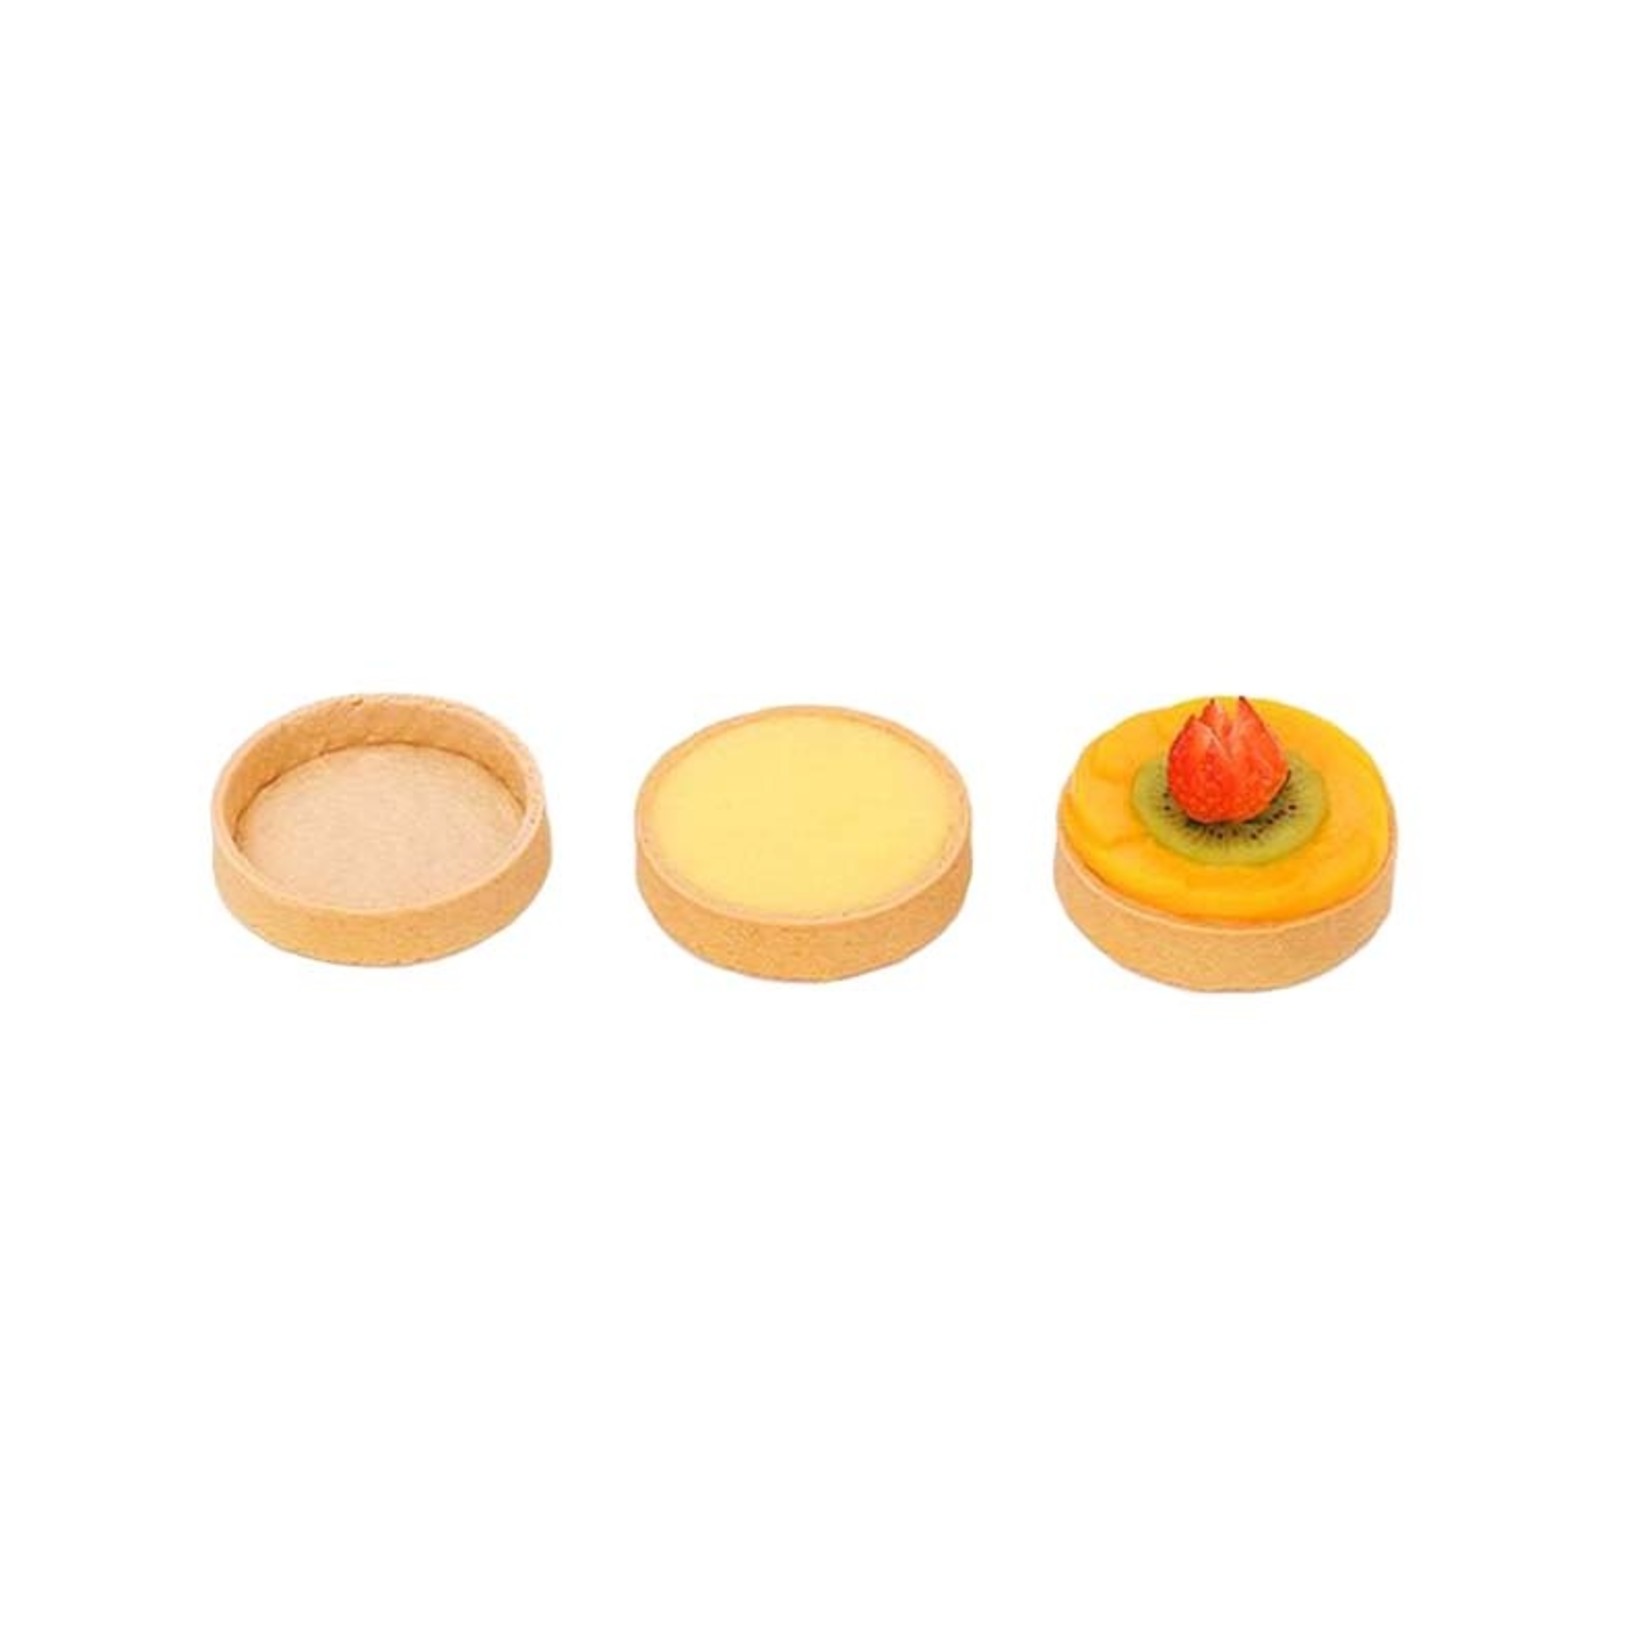 Le Chic Patissier Le Chic Patissier - Sweet Round Tart shell - 4" (8 ct) sleeve